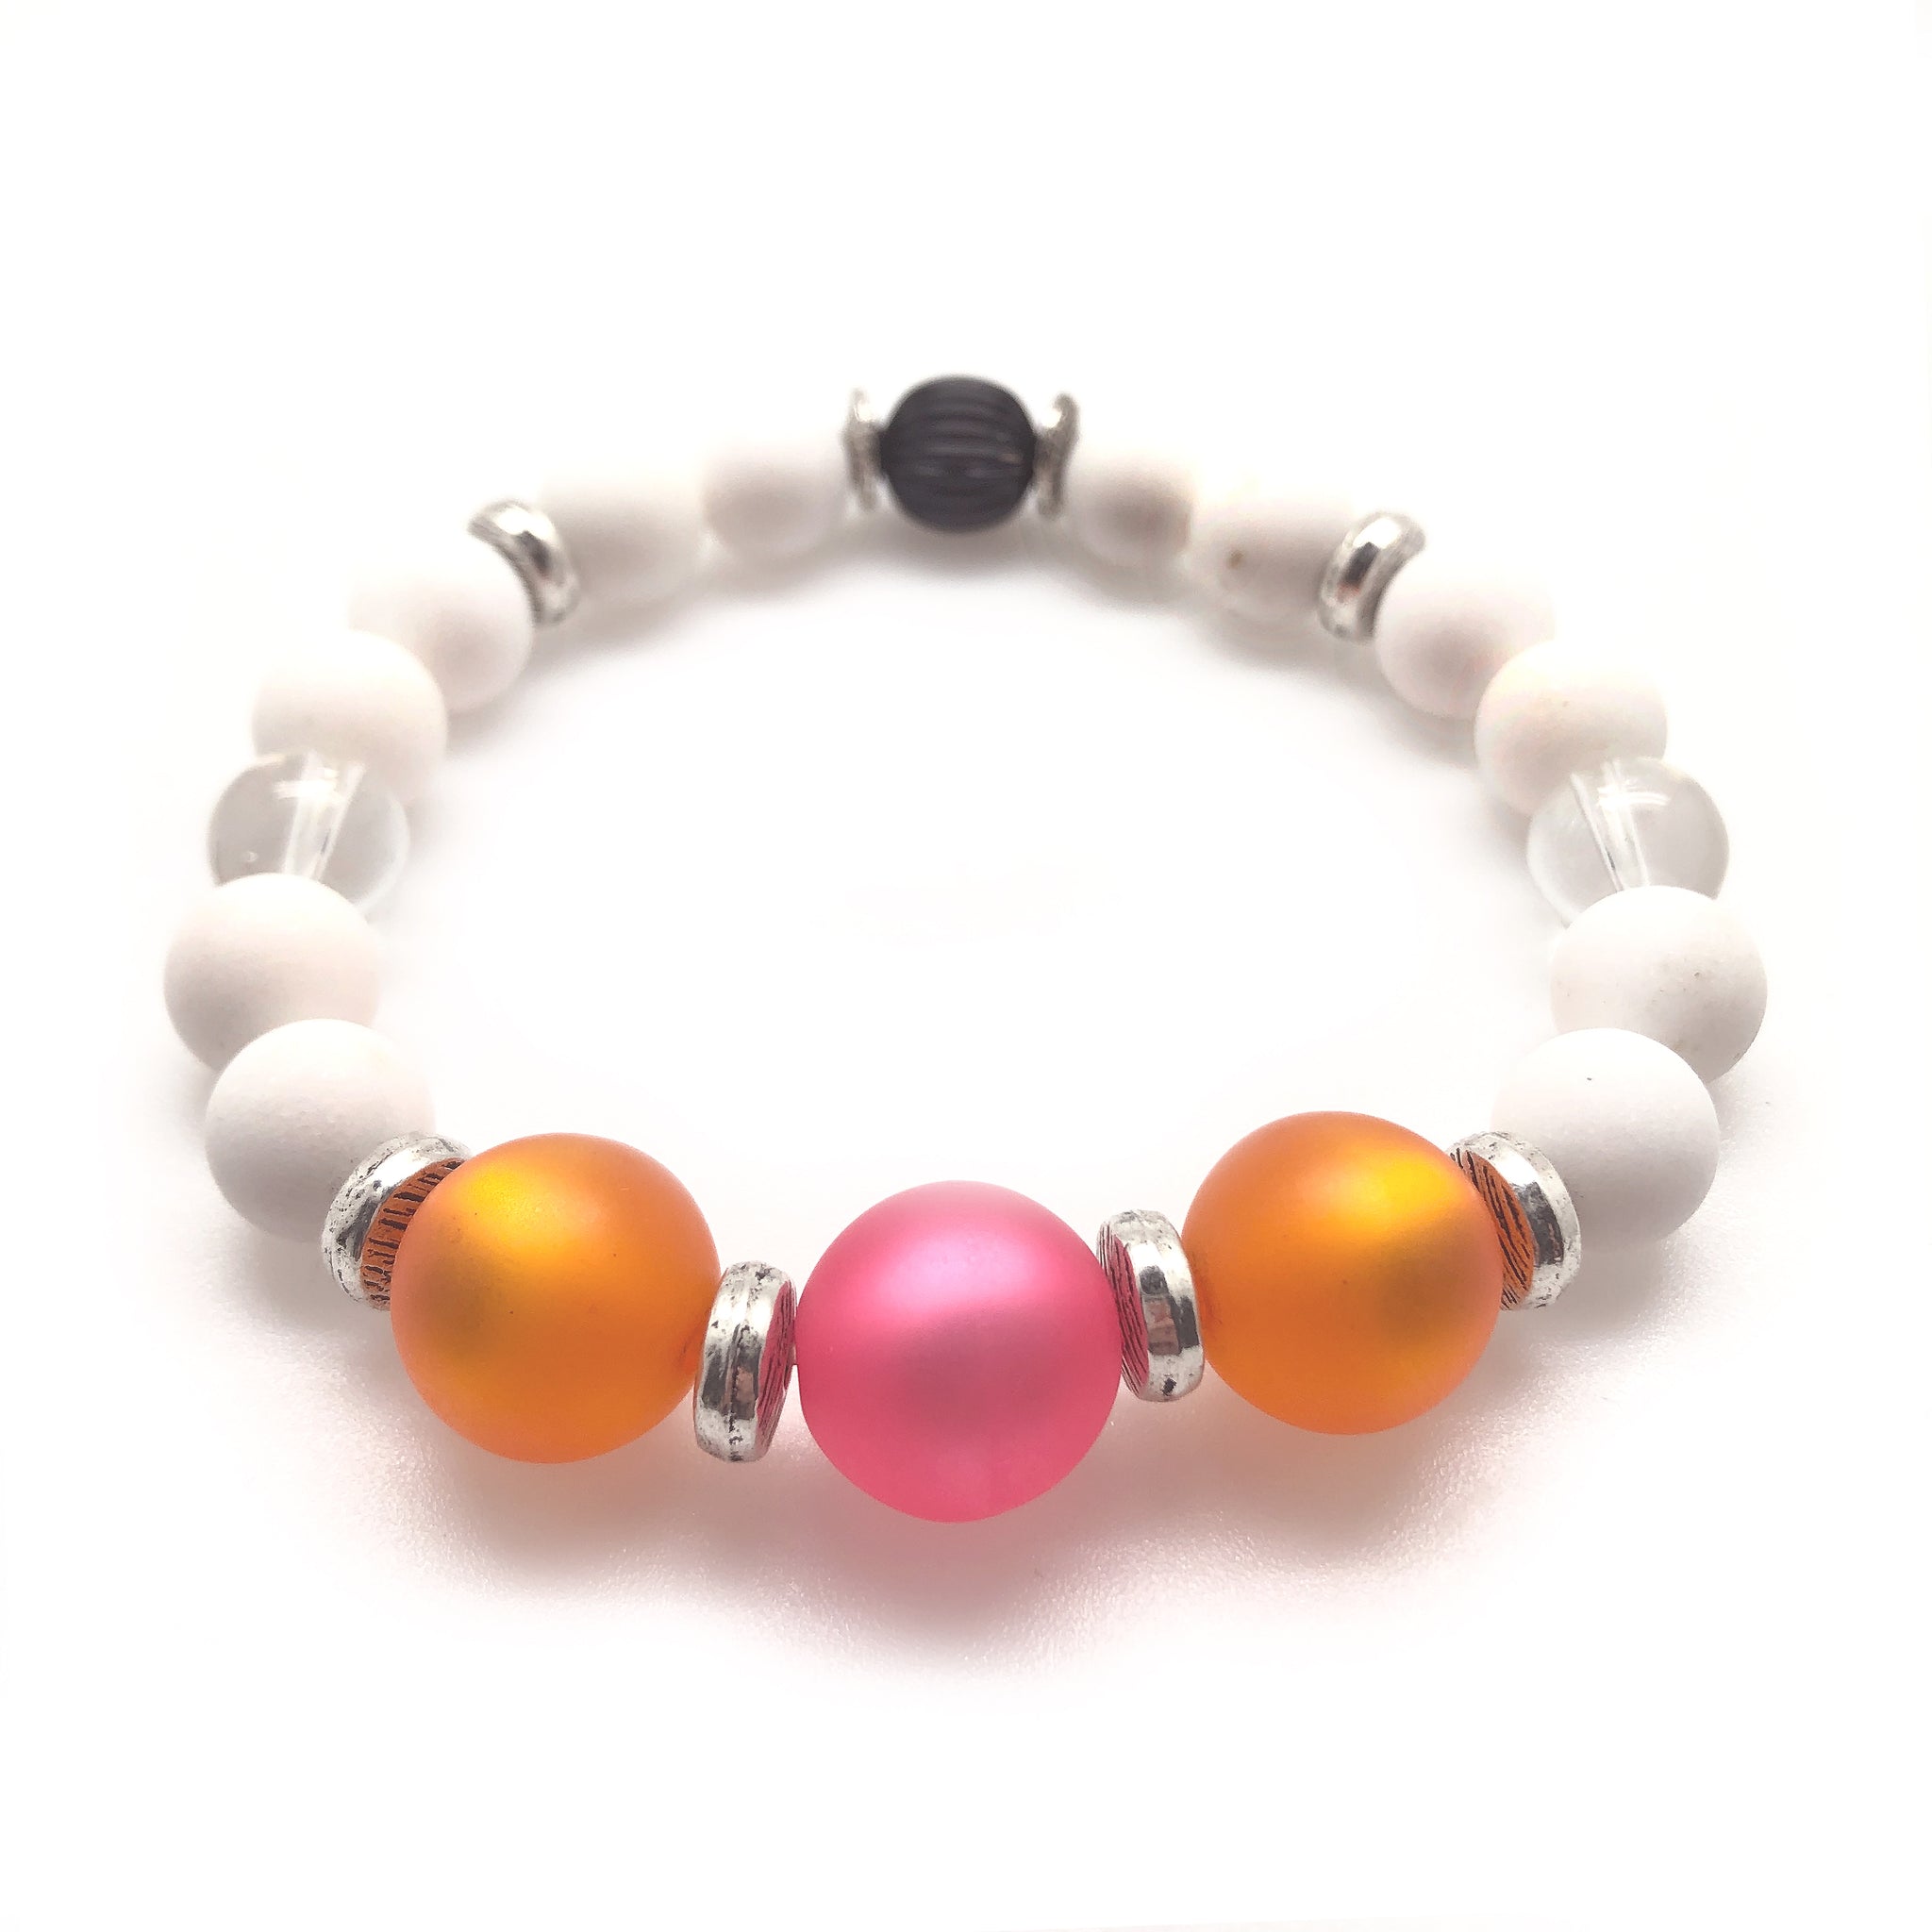 Bliss Bracelet features pink and orange German resin beads surrounded by white matte agate semi-precious stones and gloss clear glass beads.